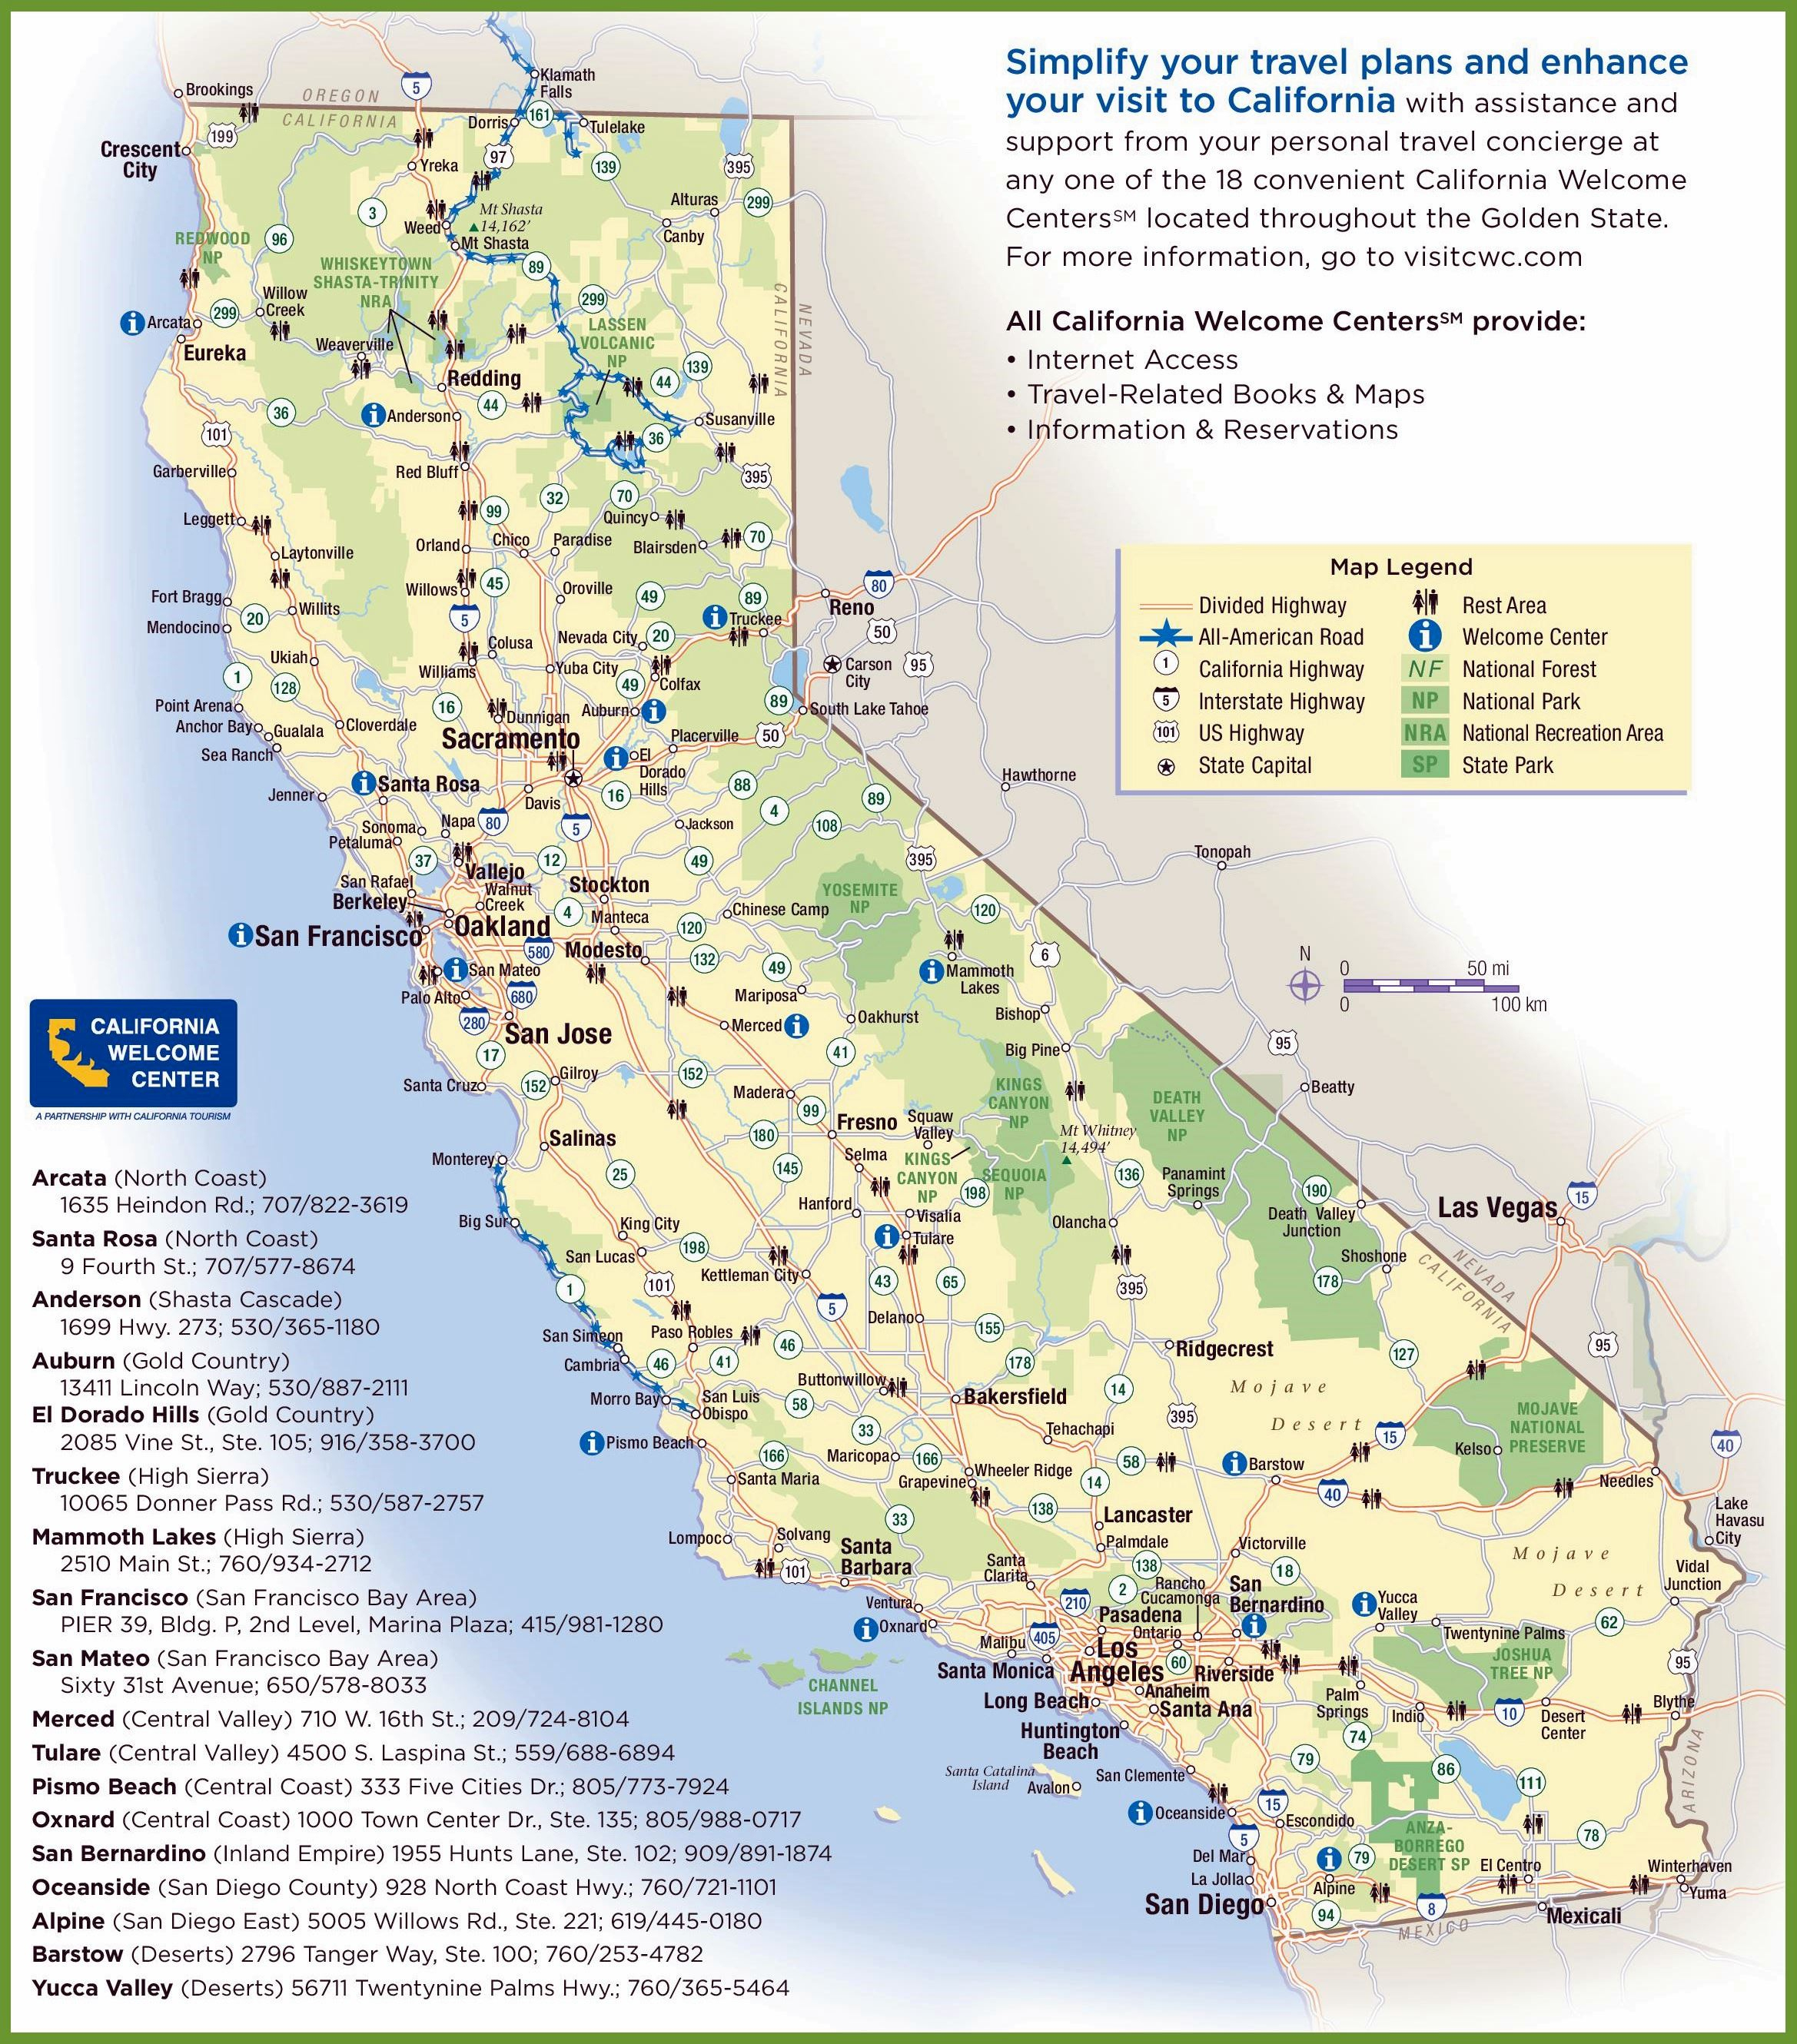 Large California Maps For Free Download And Print | High-Resolution - Large Map Of California